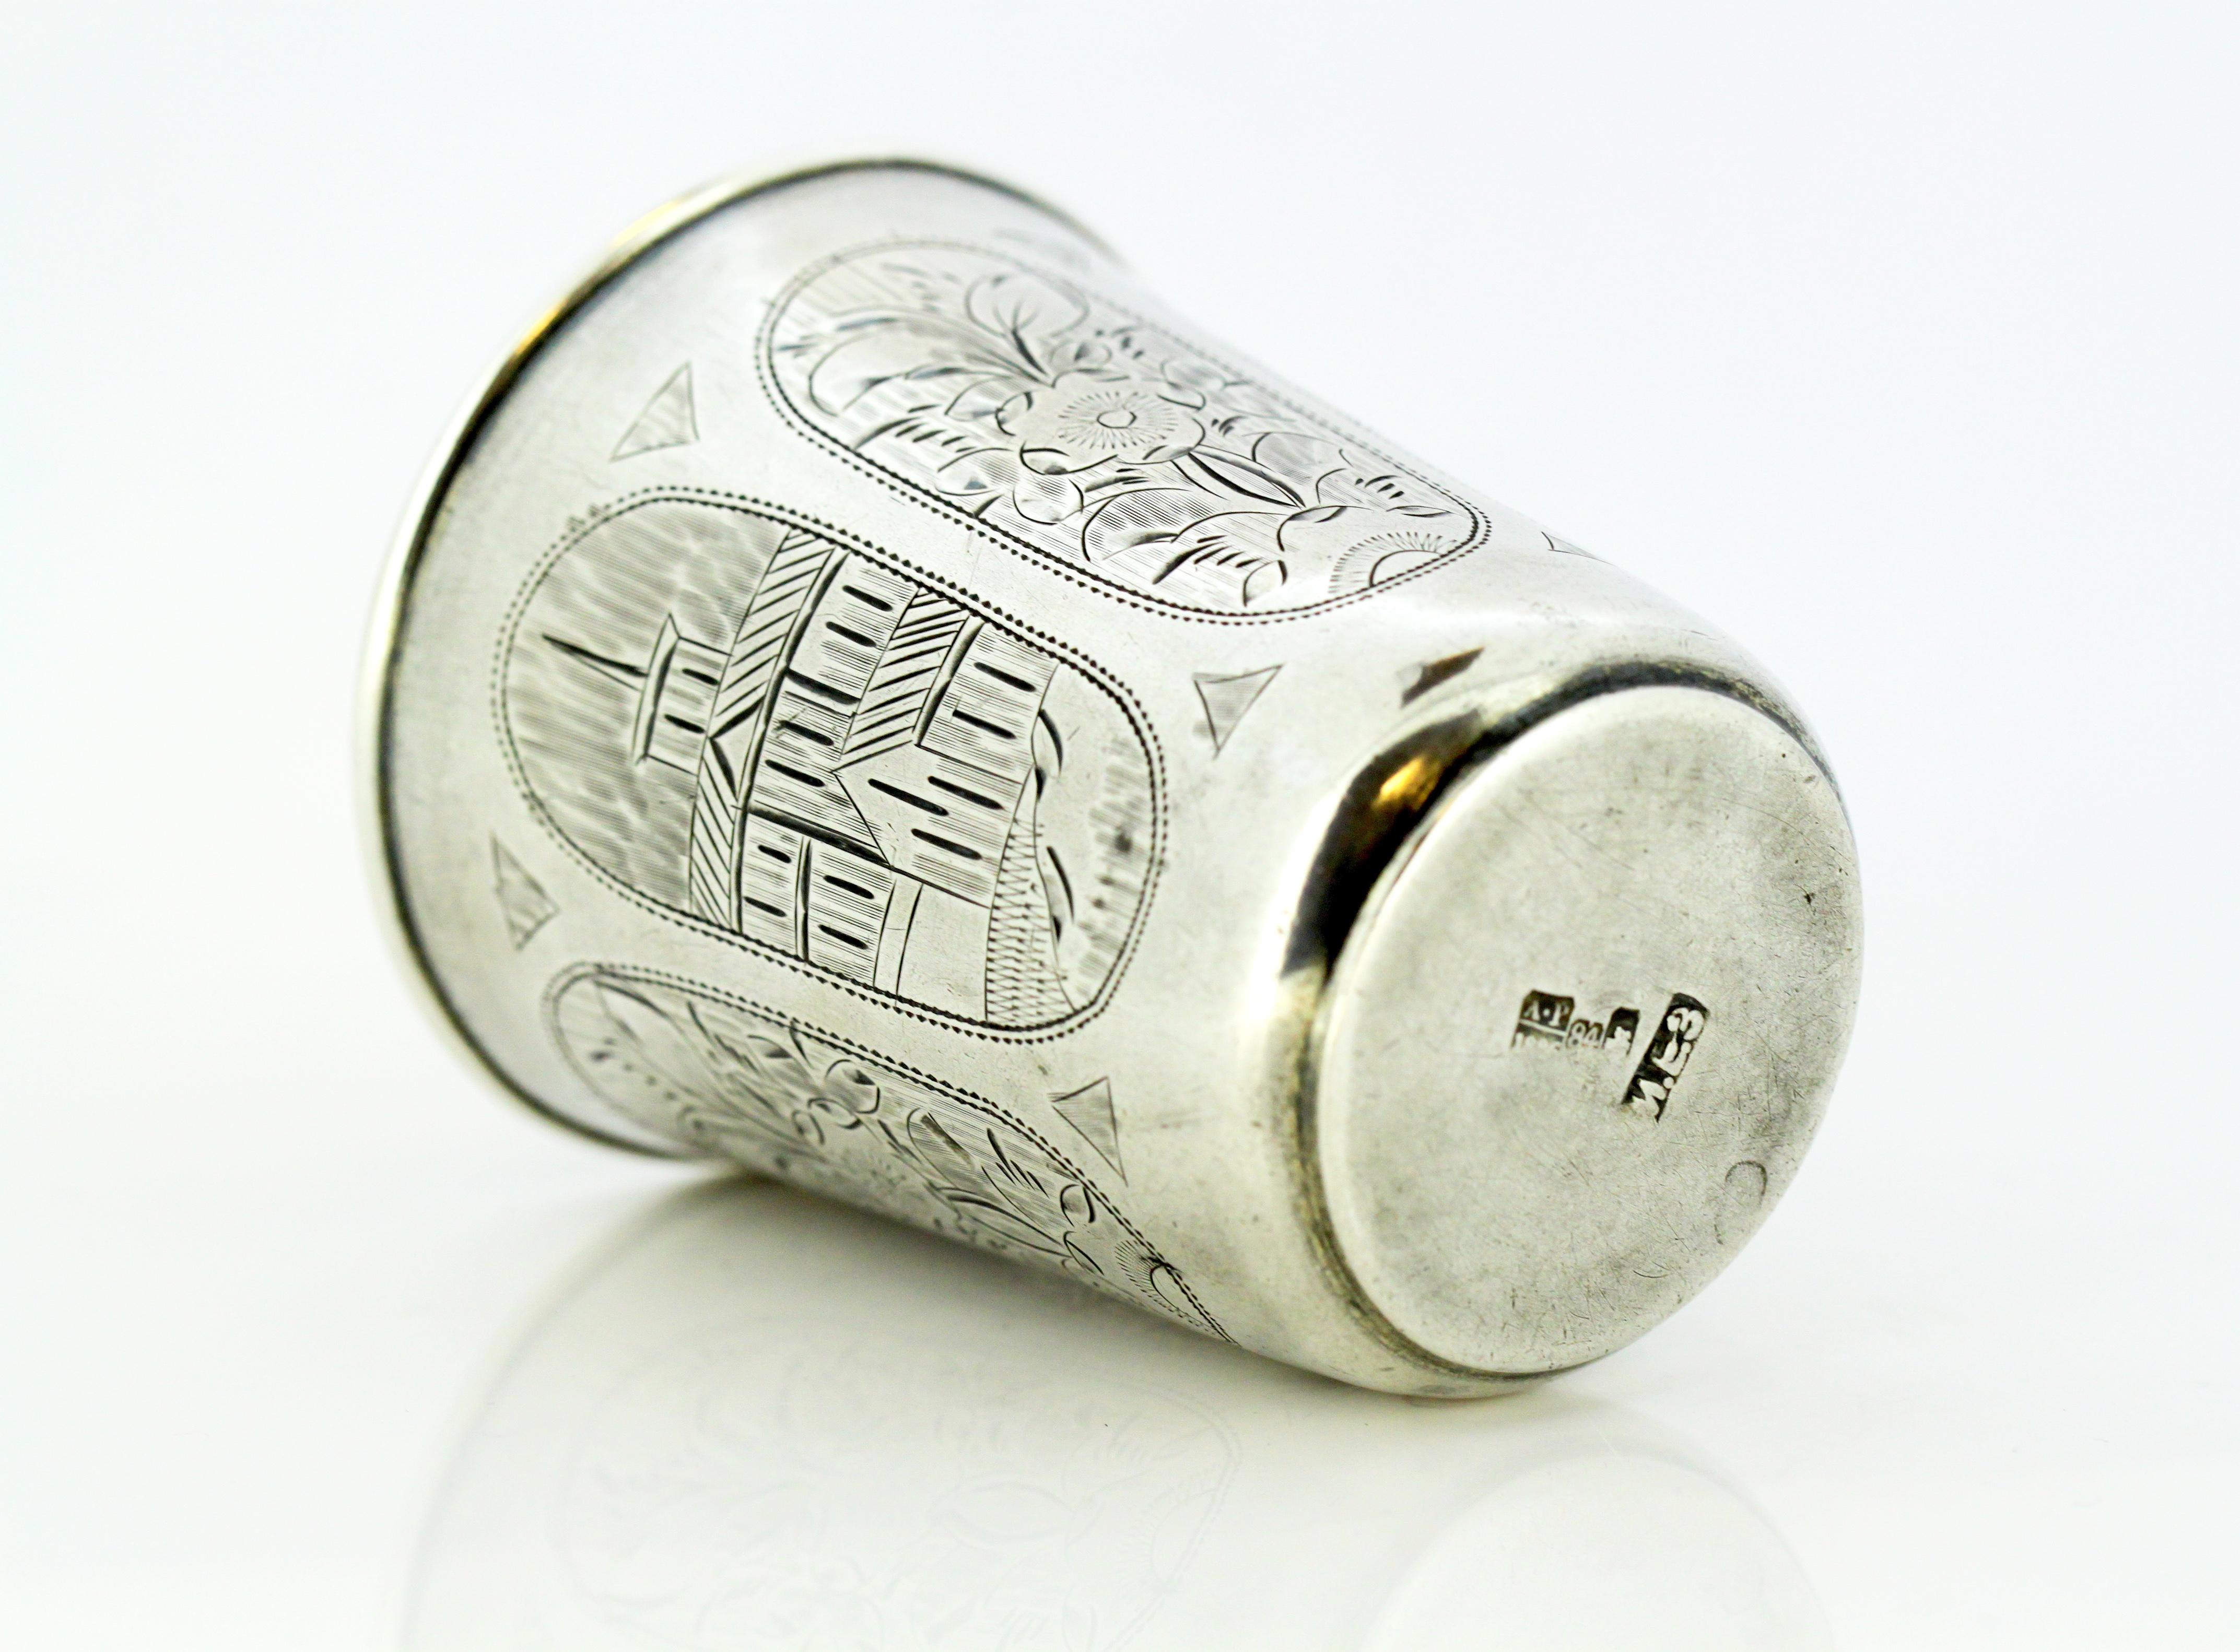 Late 19th Century Fine and Impressive Antique Russian Silver Kiddush Cup, by Israel Eseevich